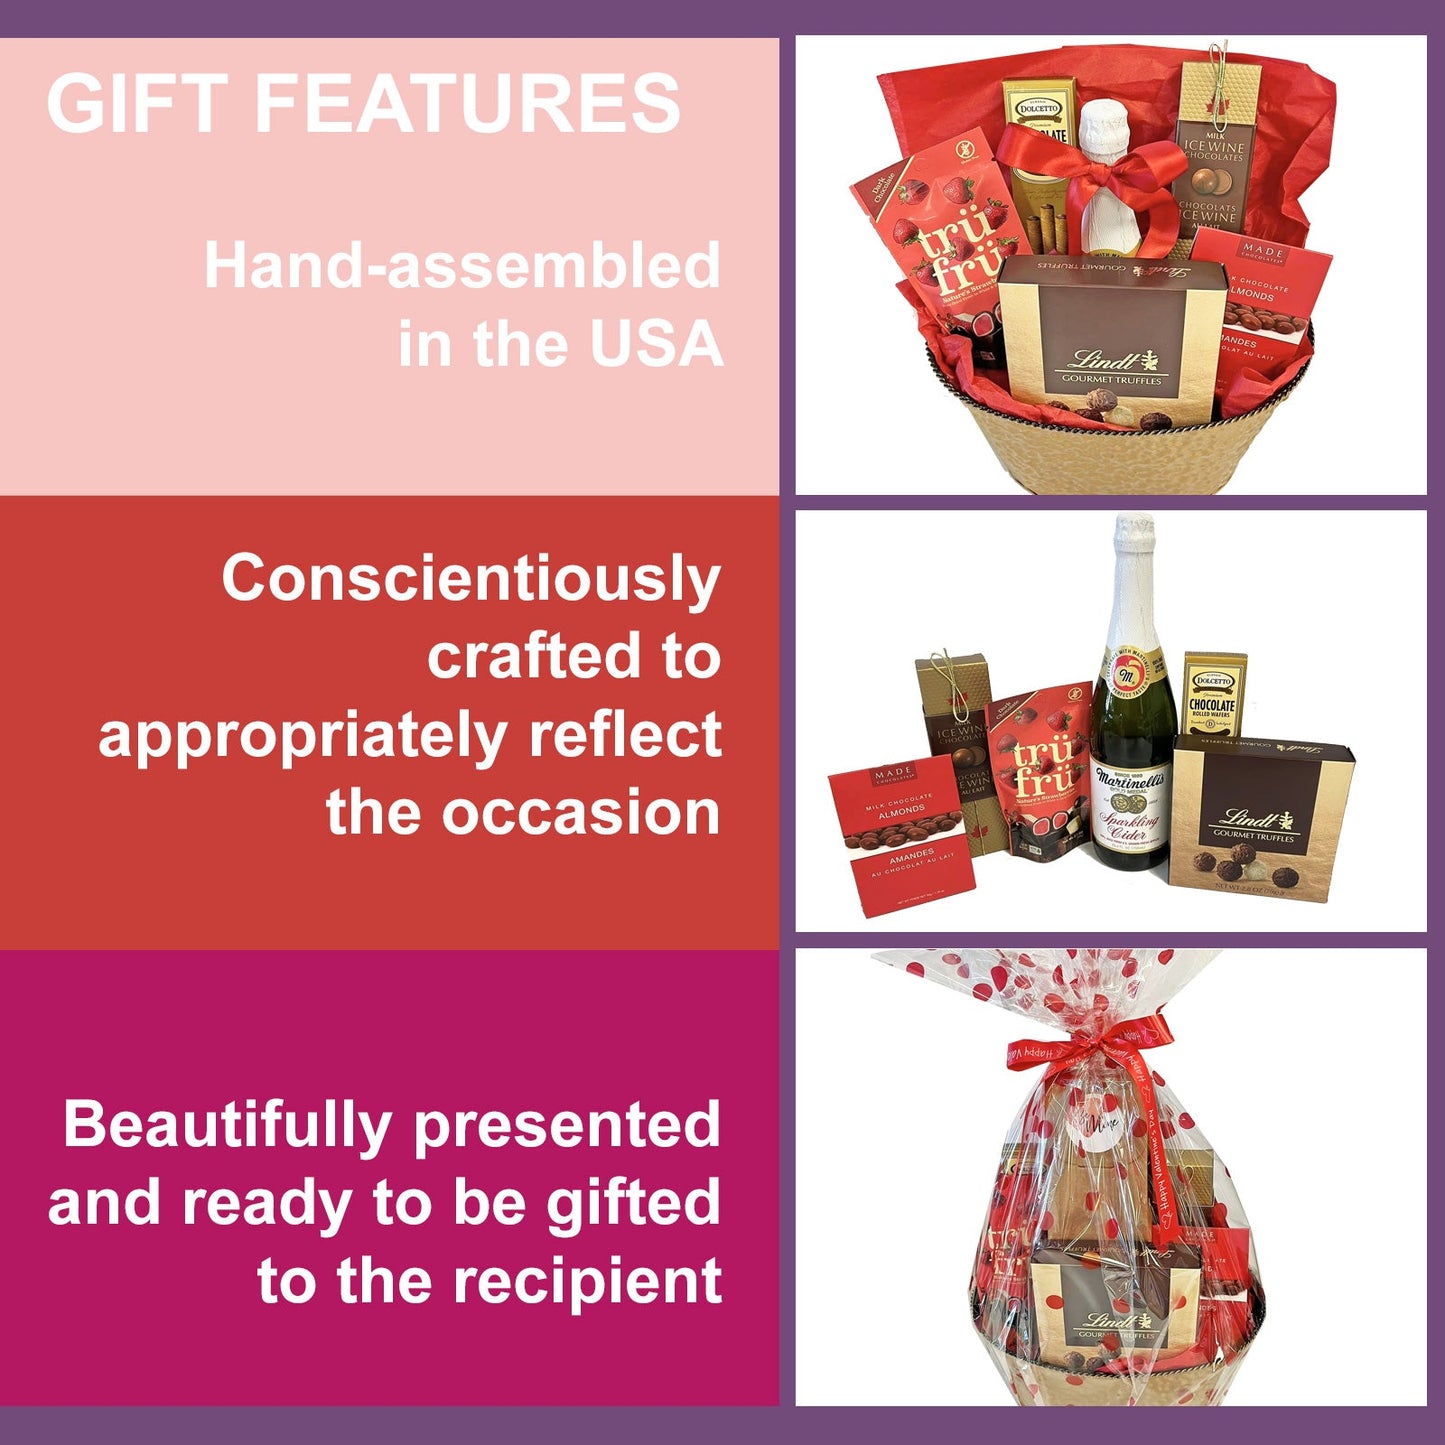 Mother's Day Chocolates Gift Basket with Sparkling Cider and Five Varieties of Chocolate